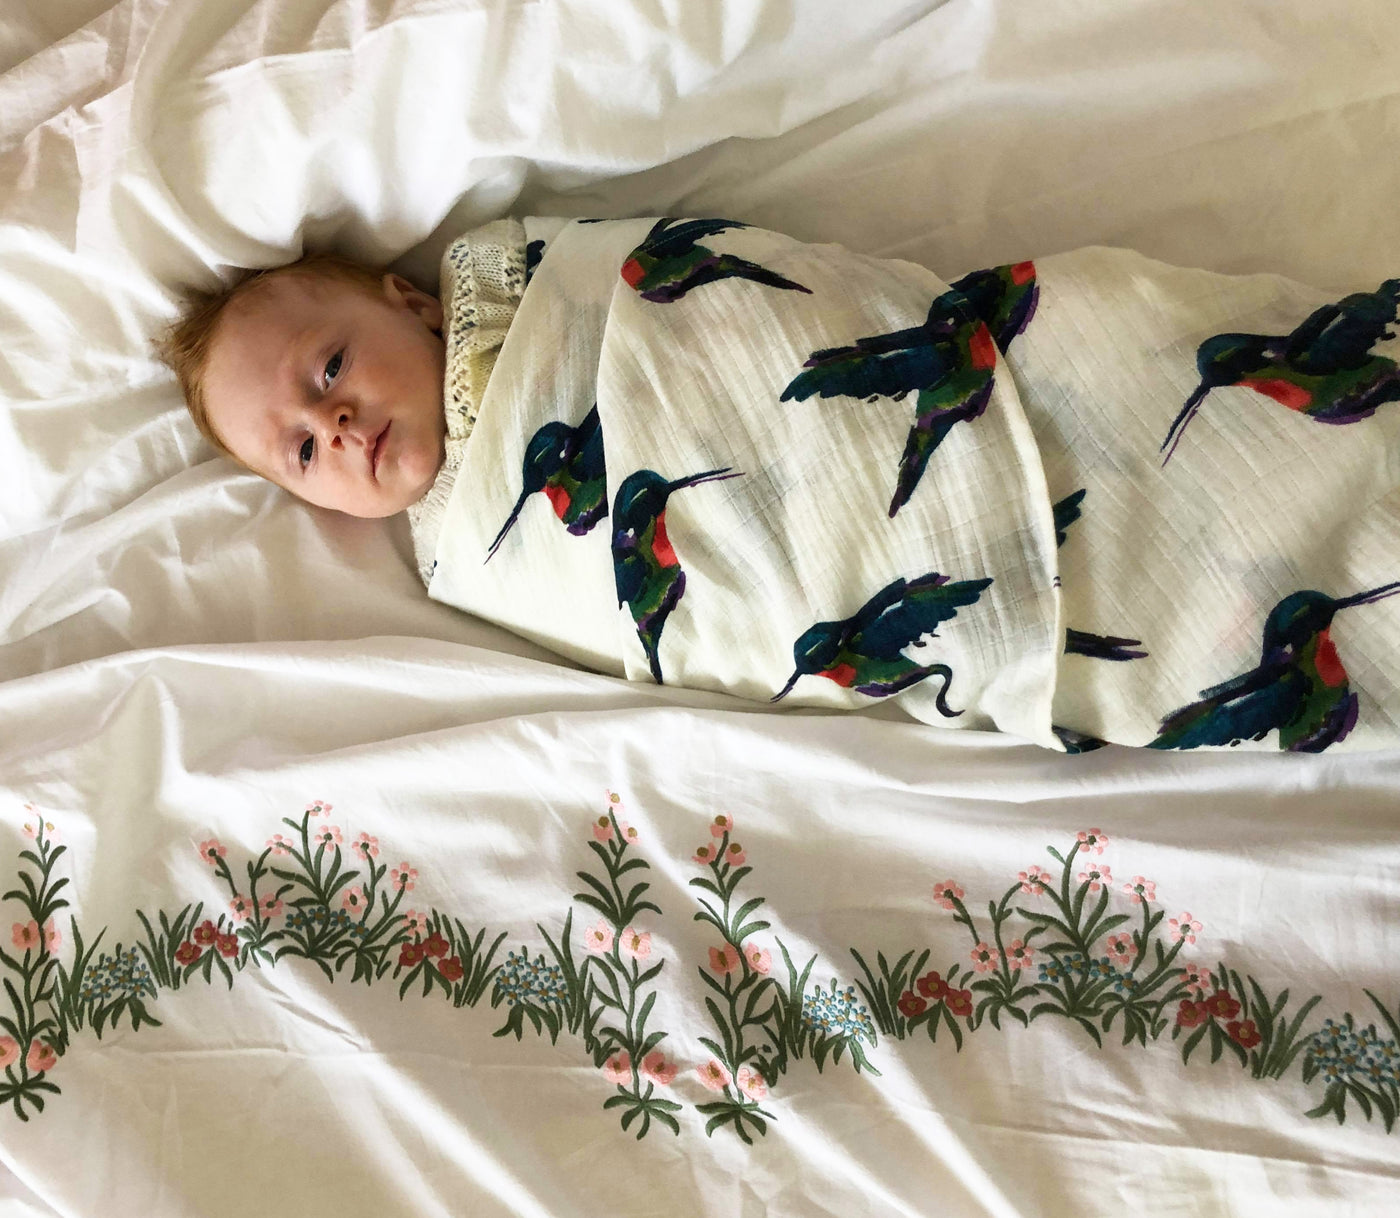 Baby lies swaddled in cotton swaddle cloth, white base with hand painted multicoloured hummingbird pattern, birds in flight, in alternating directions